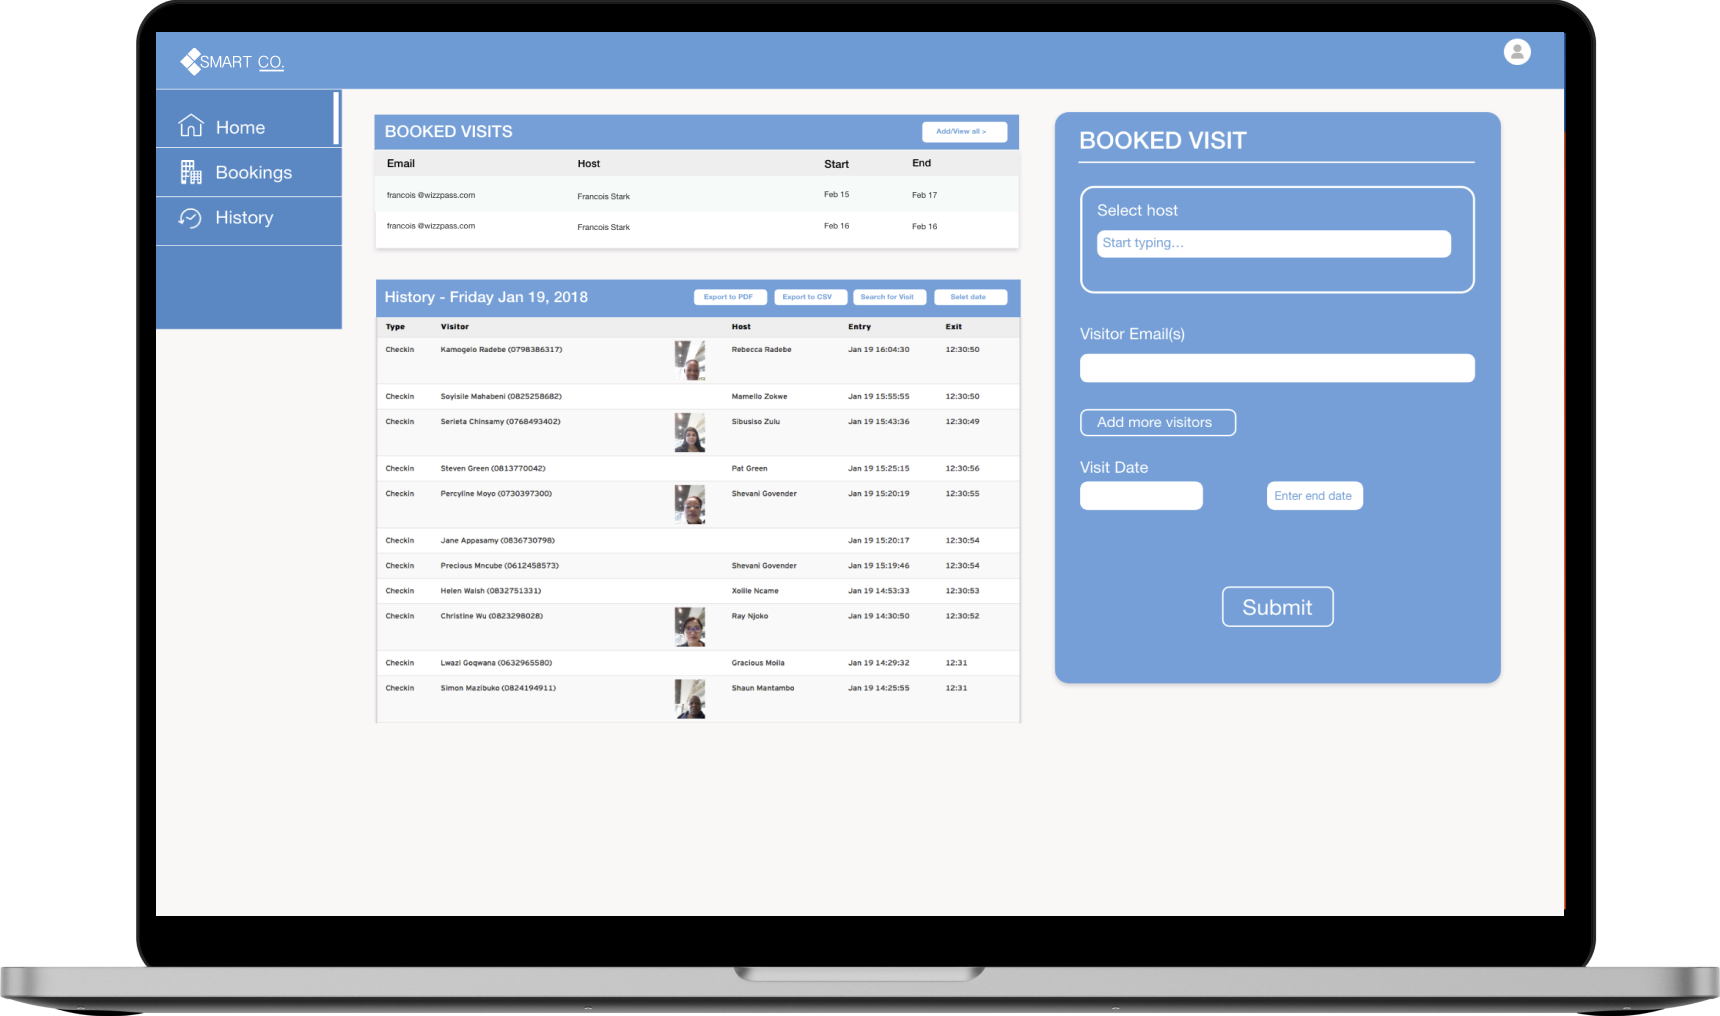 The real-time dashboard allows administrators to view a current list of all visitors checked into the building, view current parkers, view upcoming bookings and the location of each meeting, and view, search, filter, and download complete visitor reports.